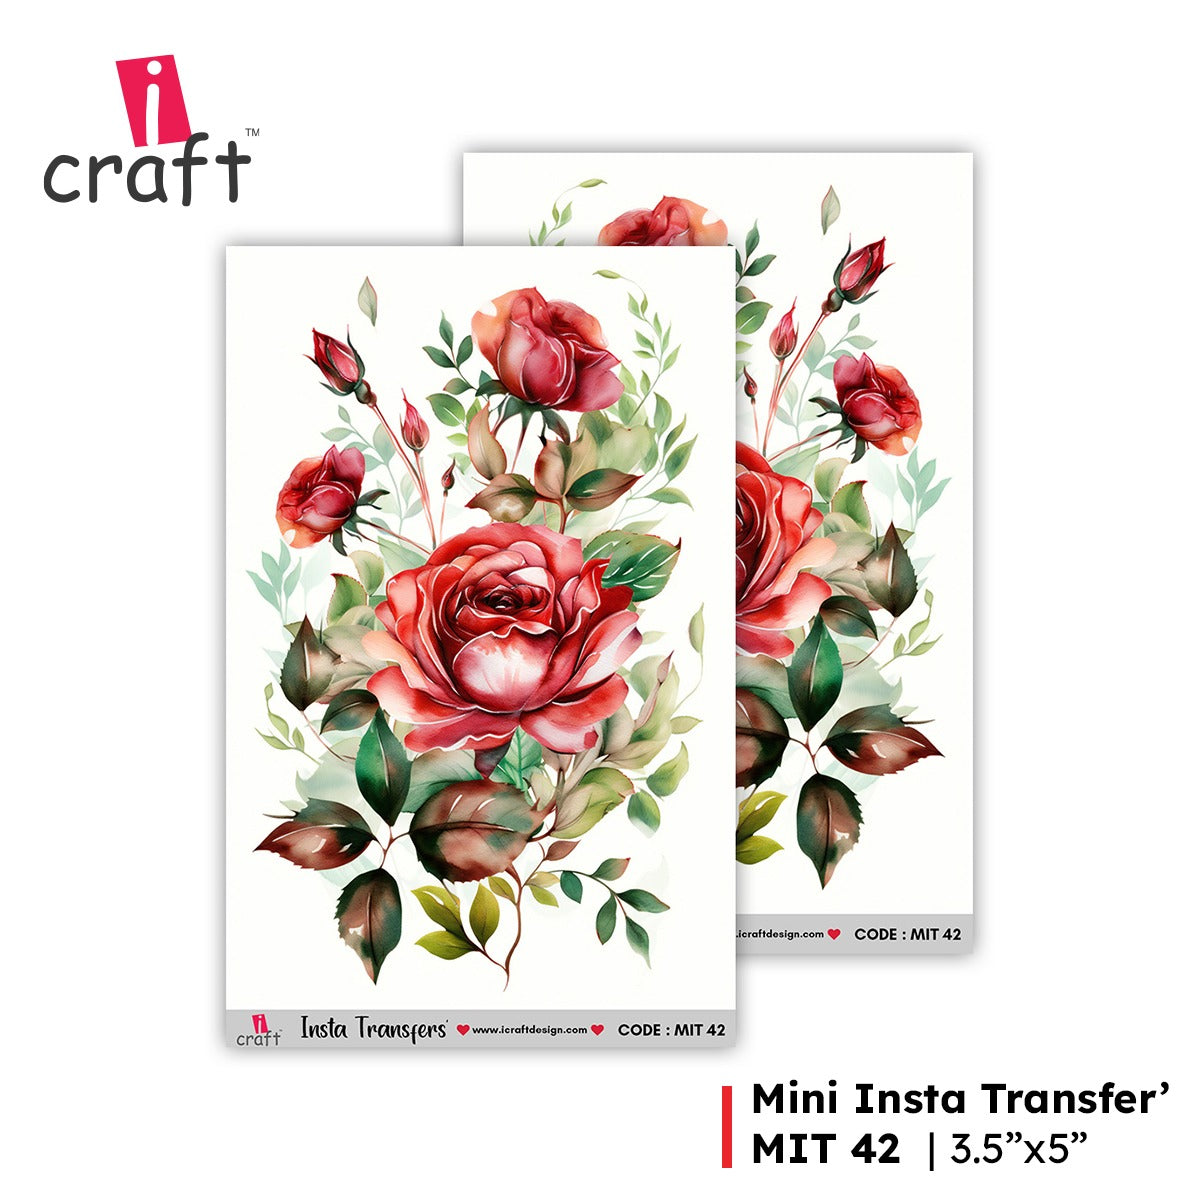 iCraft Water Transfer Stickers- Best use for Resin, Fabric, Plastic, MDF & Glass - Decorative Decals in Floral, Quotes & More (3.5" x 5")-MIT 42